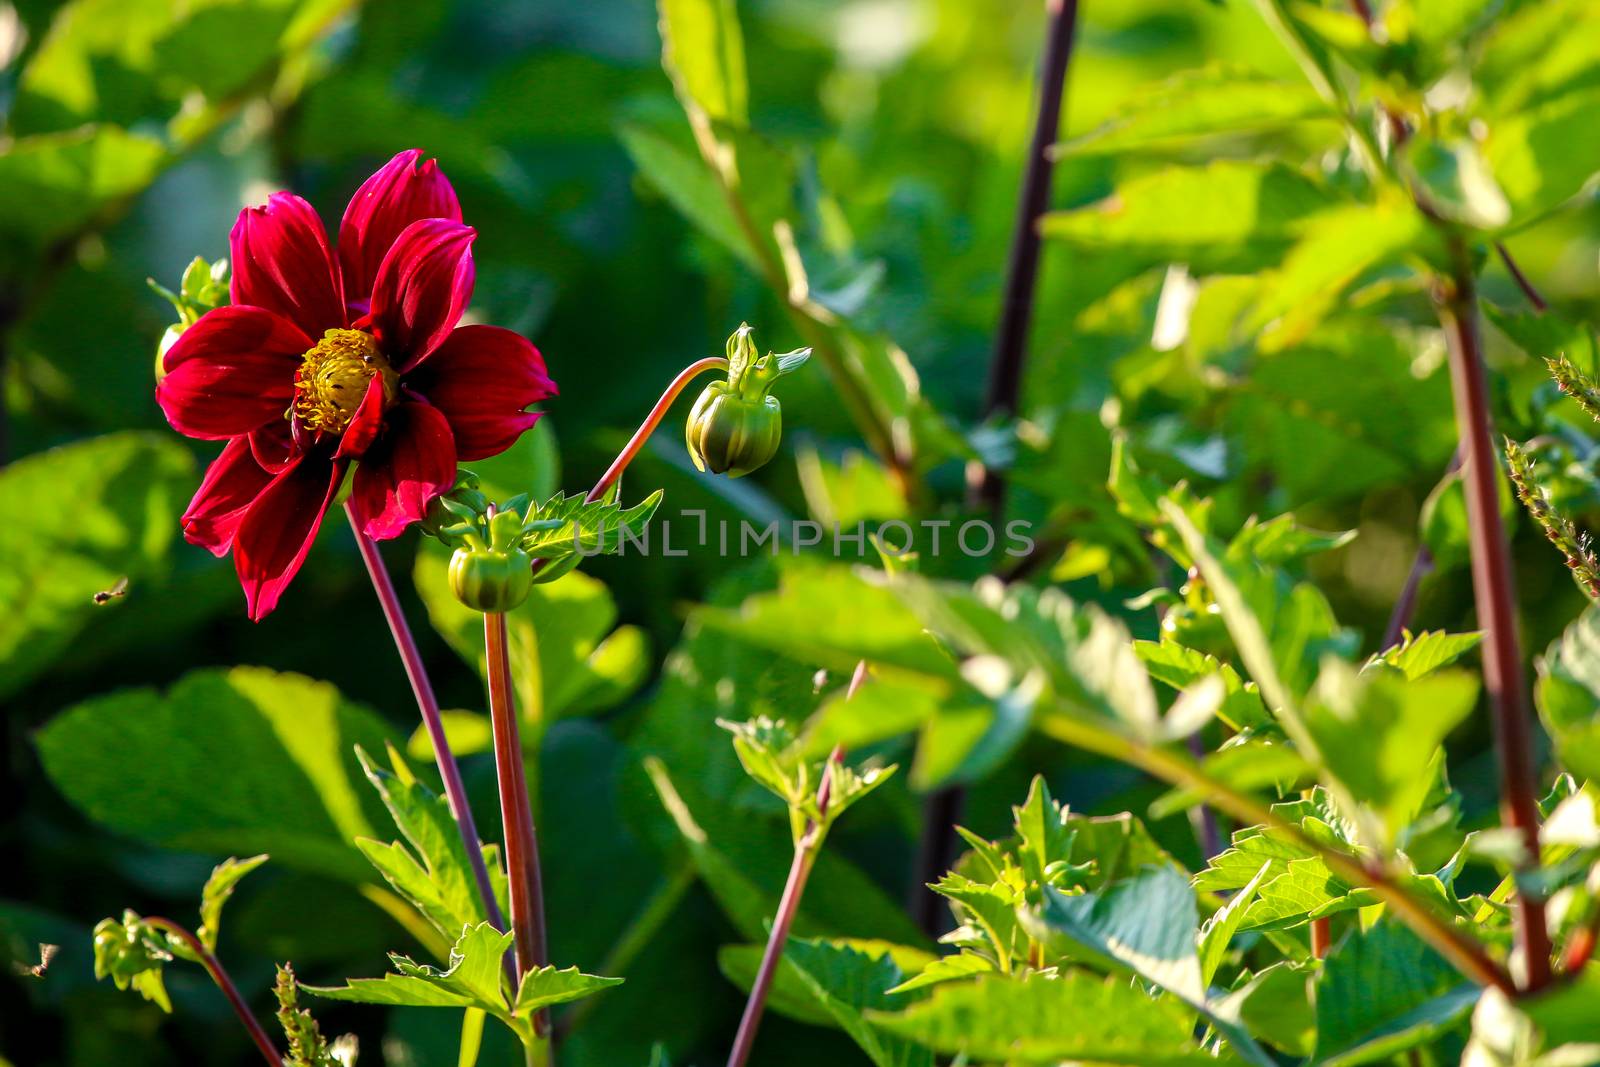 Background with  red dahlia in green meadow. Dahlia is mexican plant of the daisy family, which is cultivated for its brightly colored single or double flowers.

